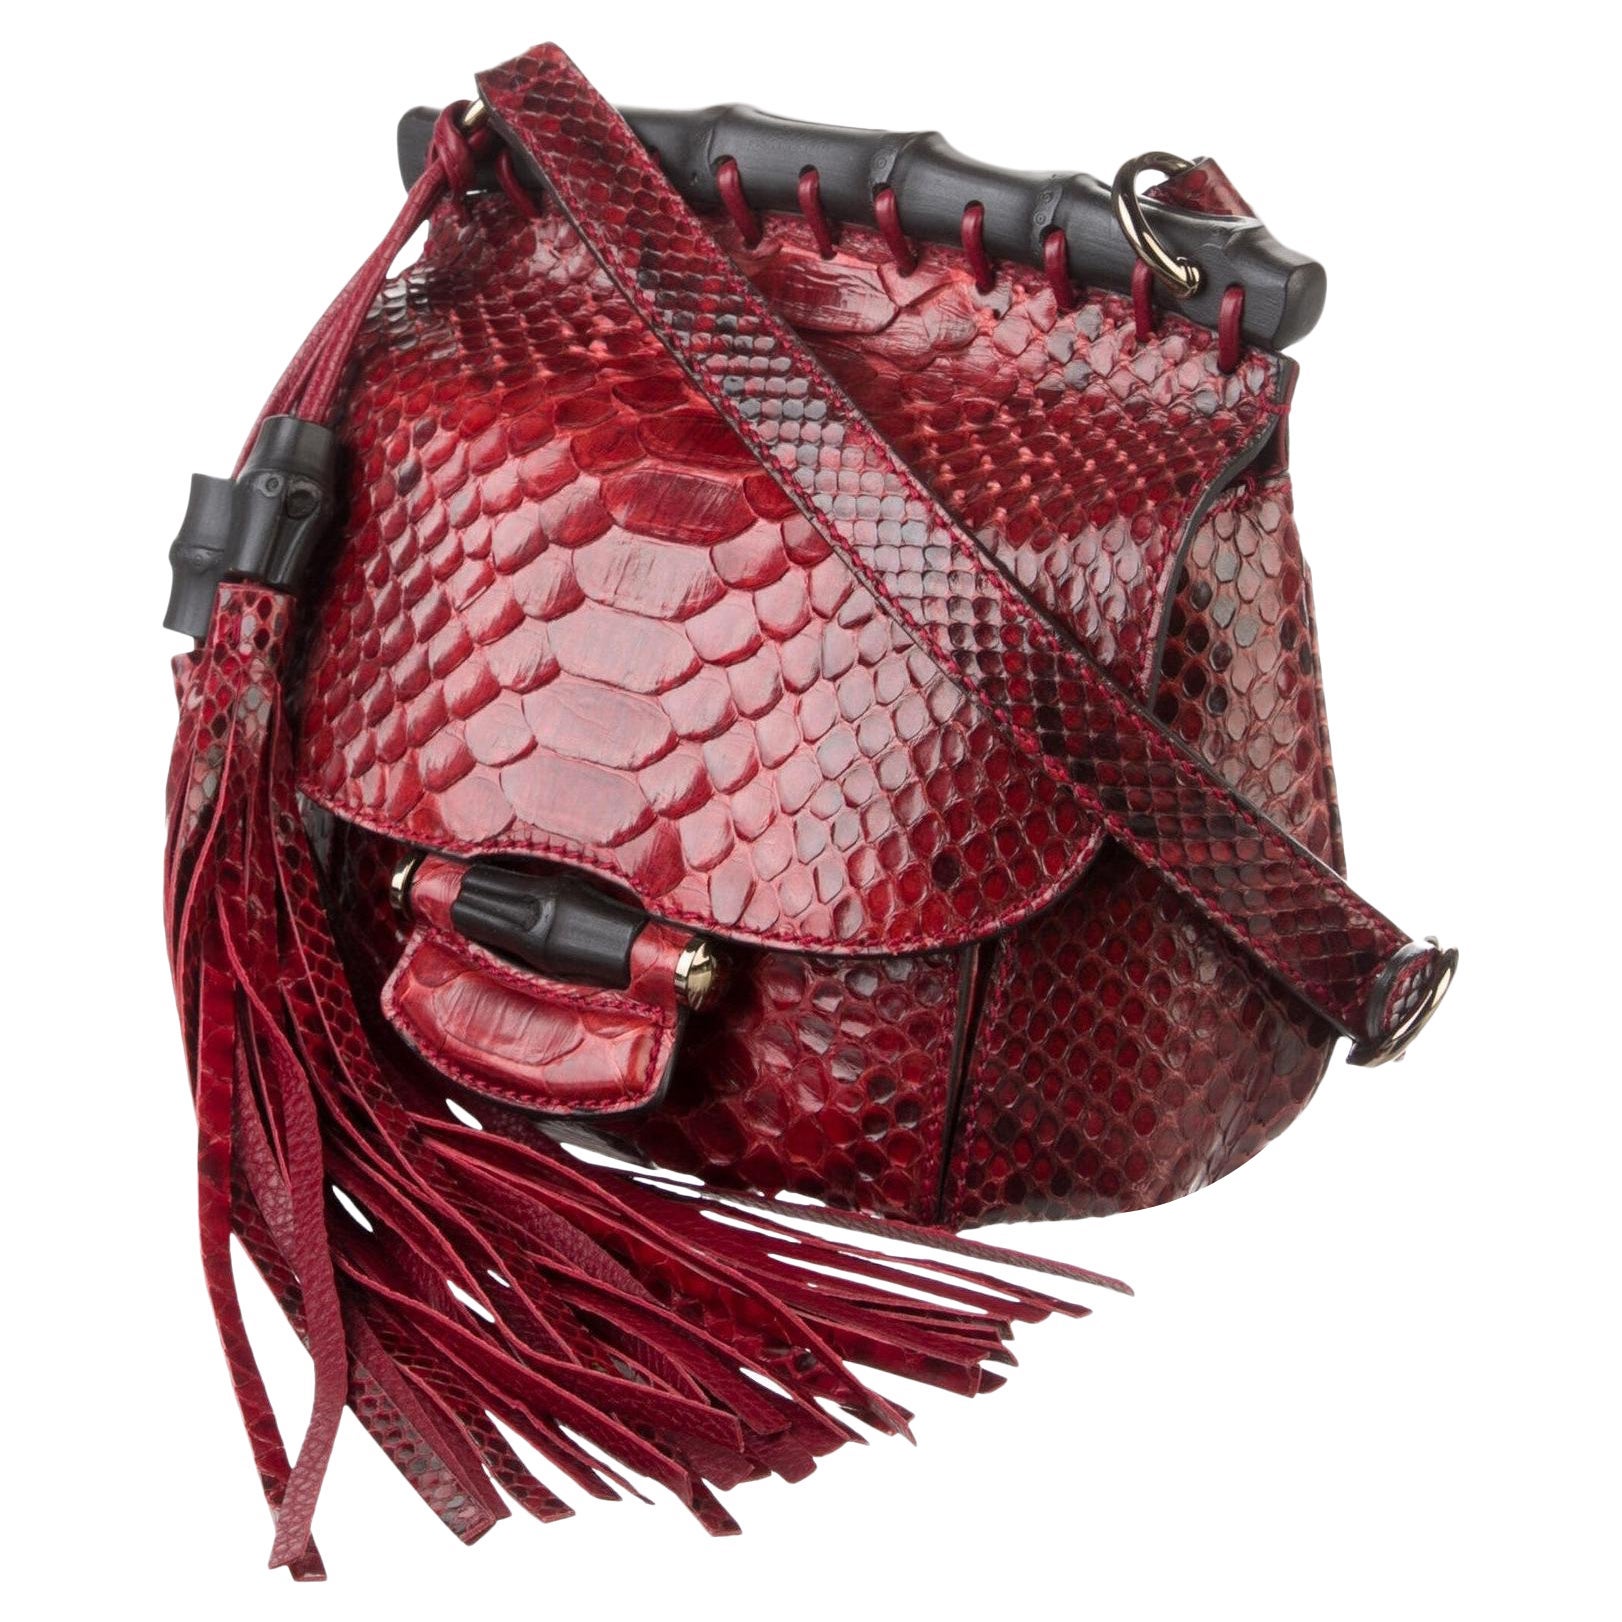 New Gucci Nouveau Python Fringe Bamboo Runway Bag in Red $3100 For Sale